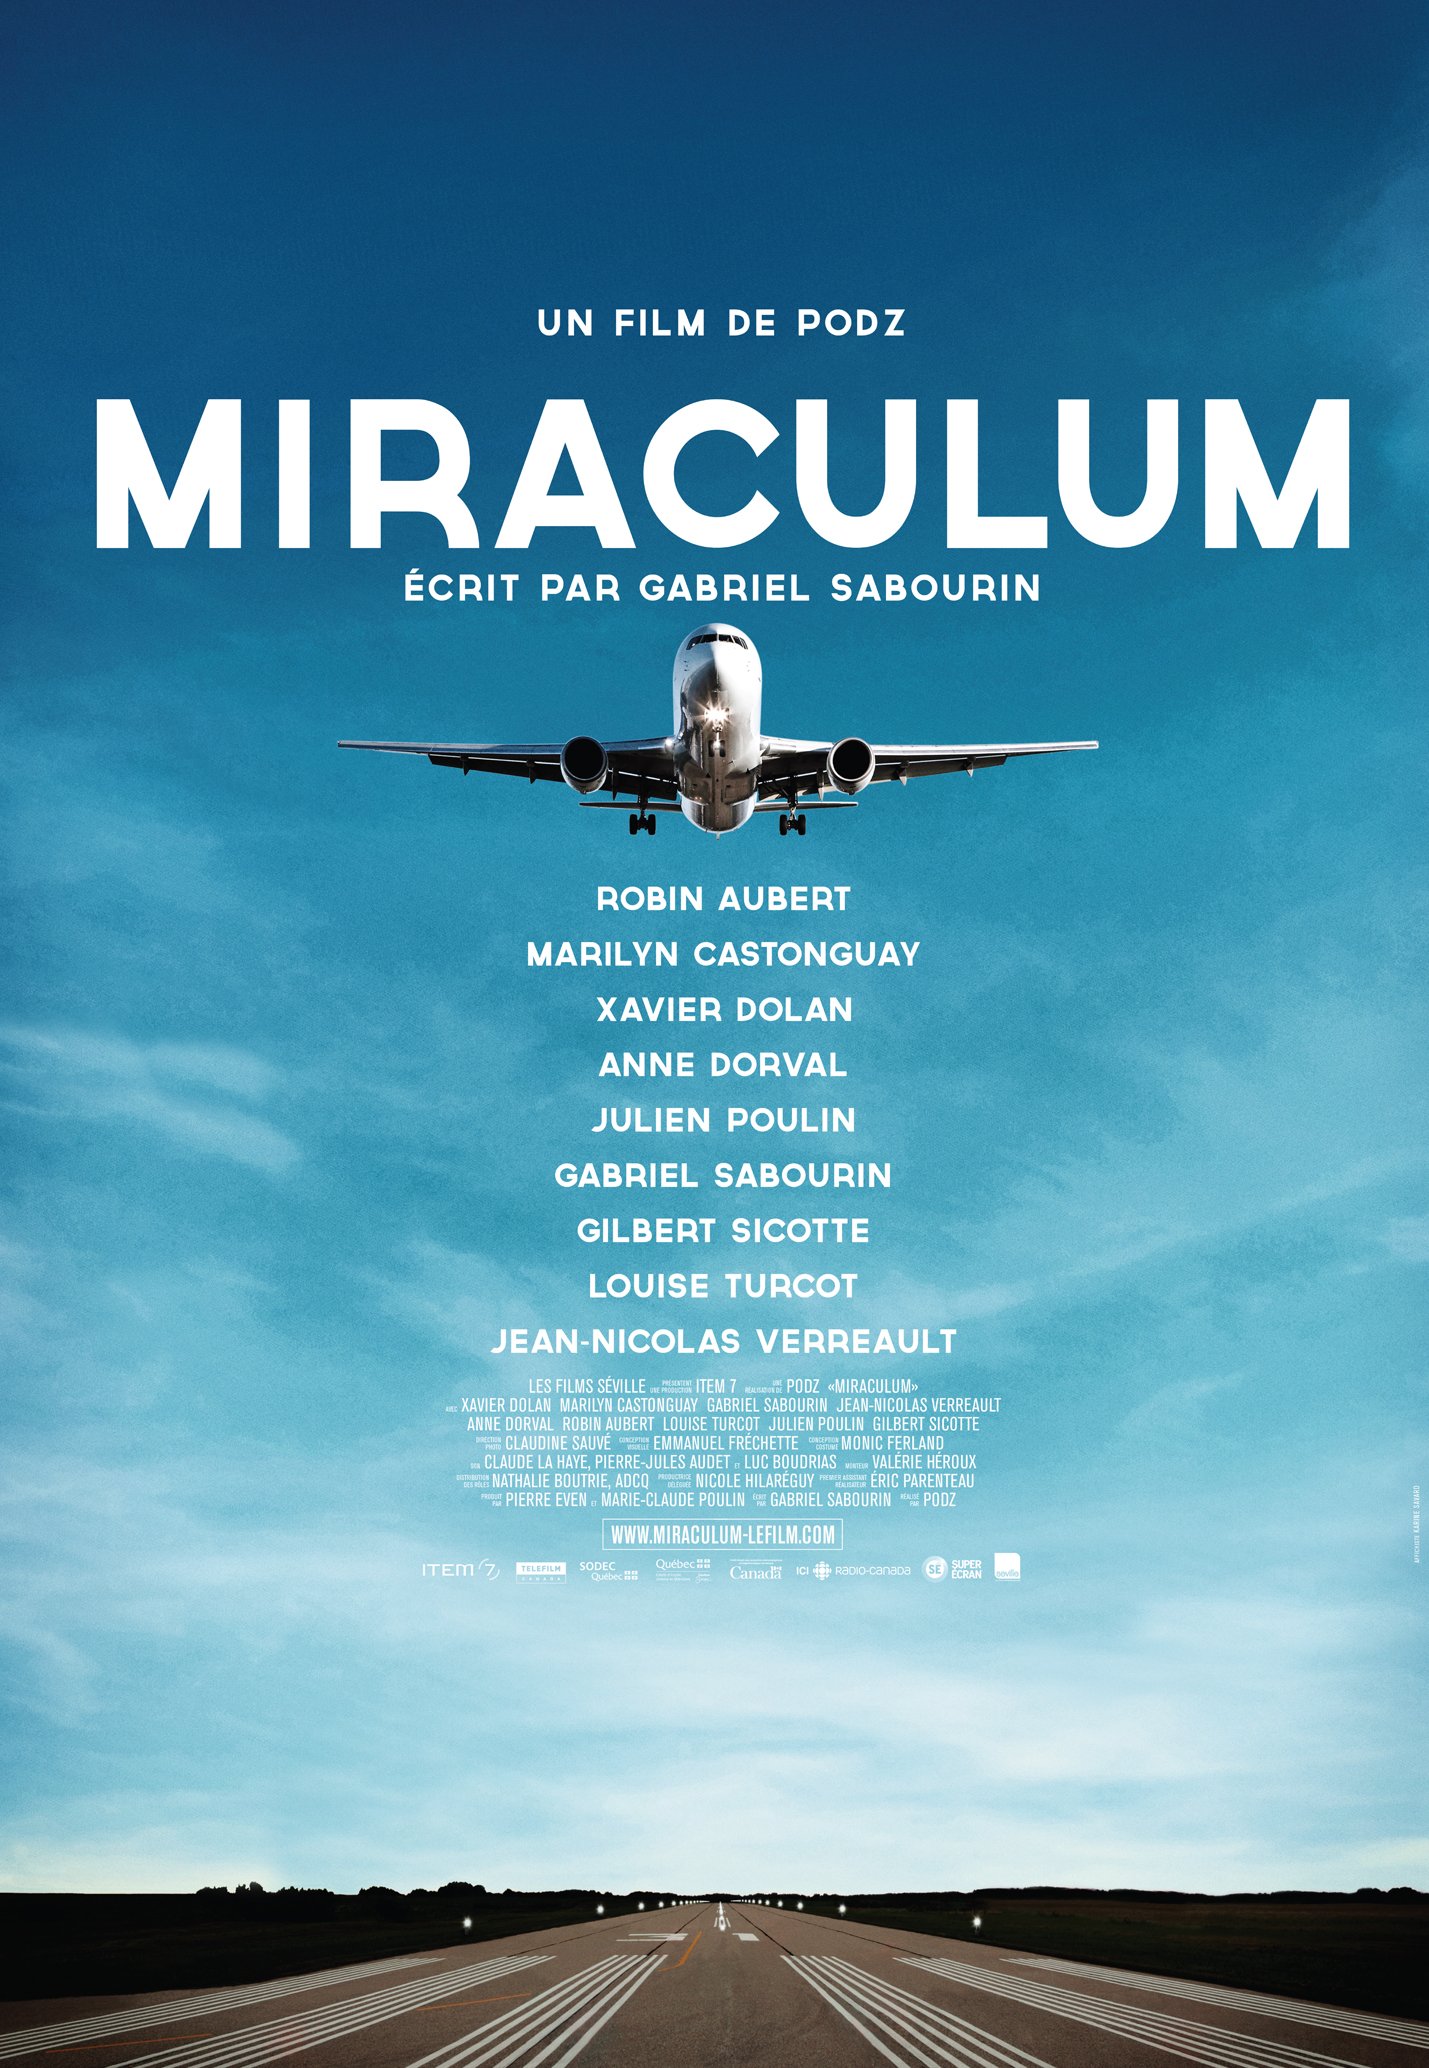 Poster of the movie Miraculum